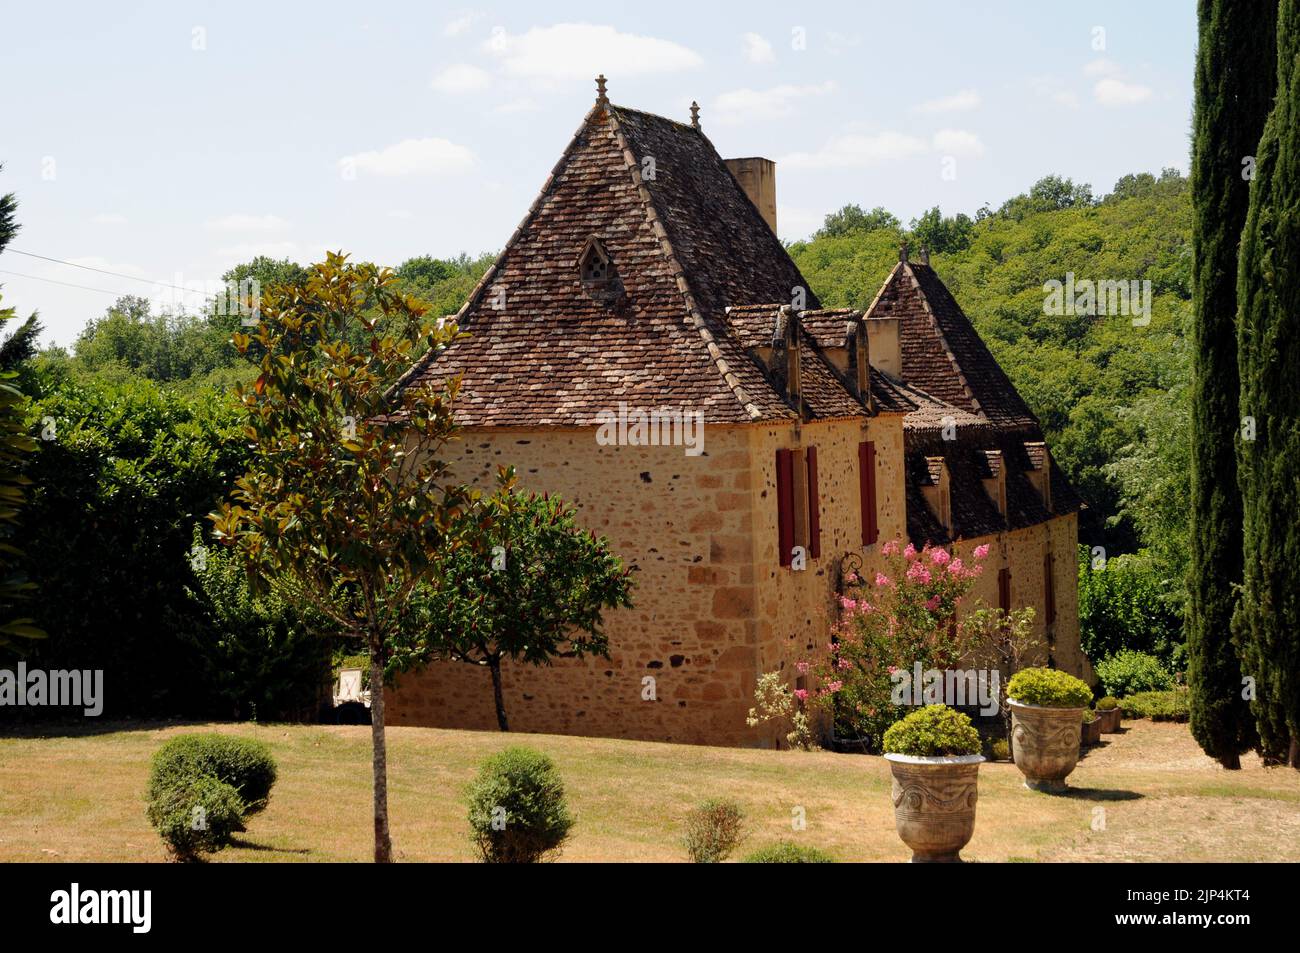 A fine example of a country house in the Perigord Noir region of the Dordogne. It is built of honey coloured stone with a steeply pitched roof. Stock Photo